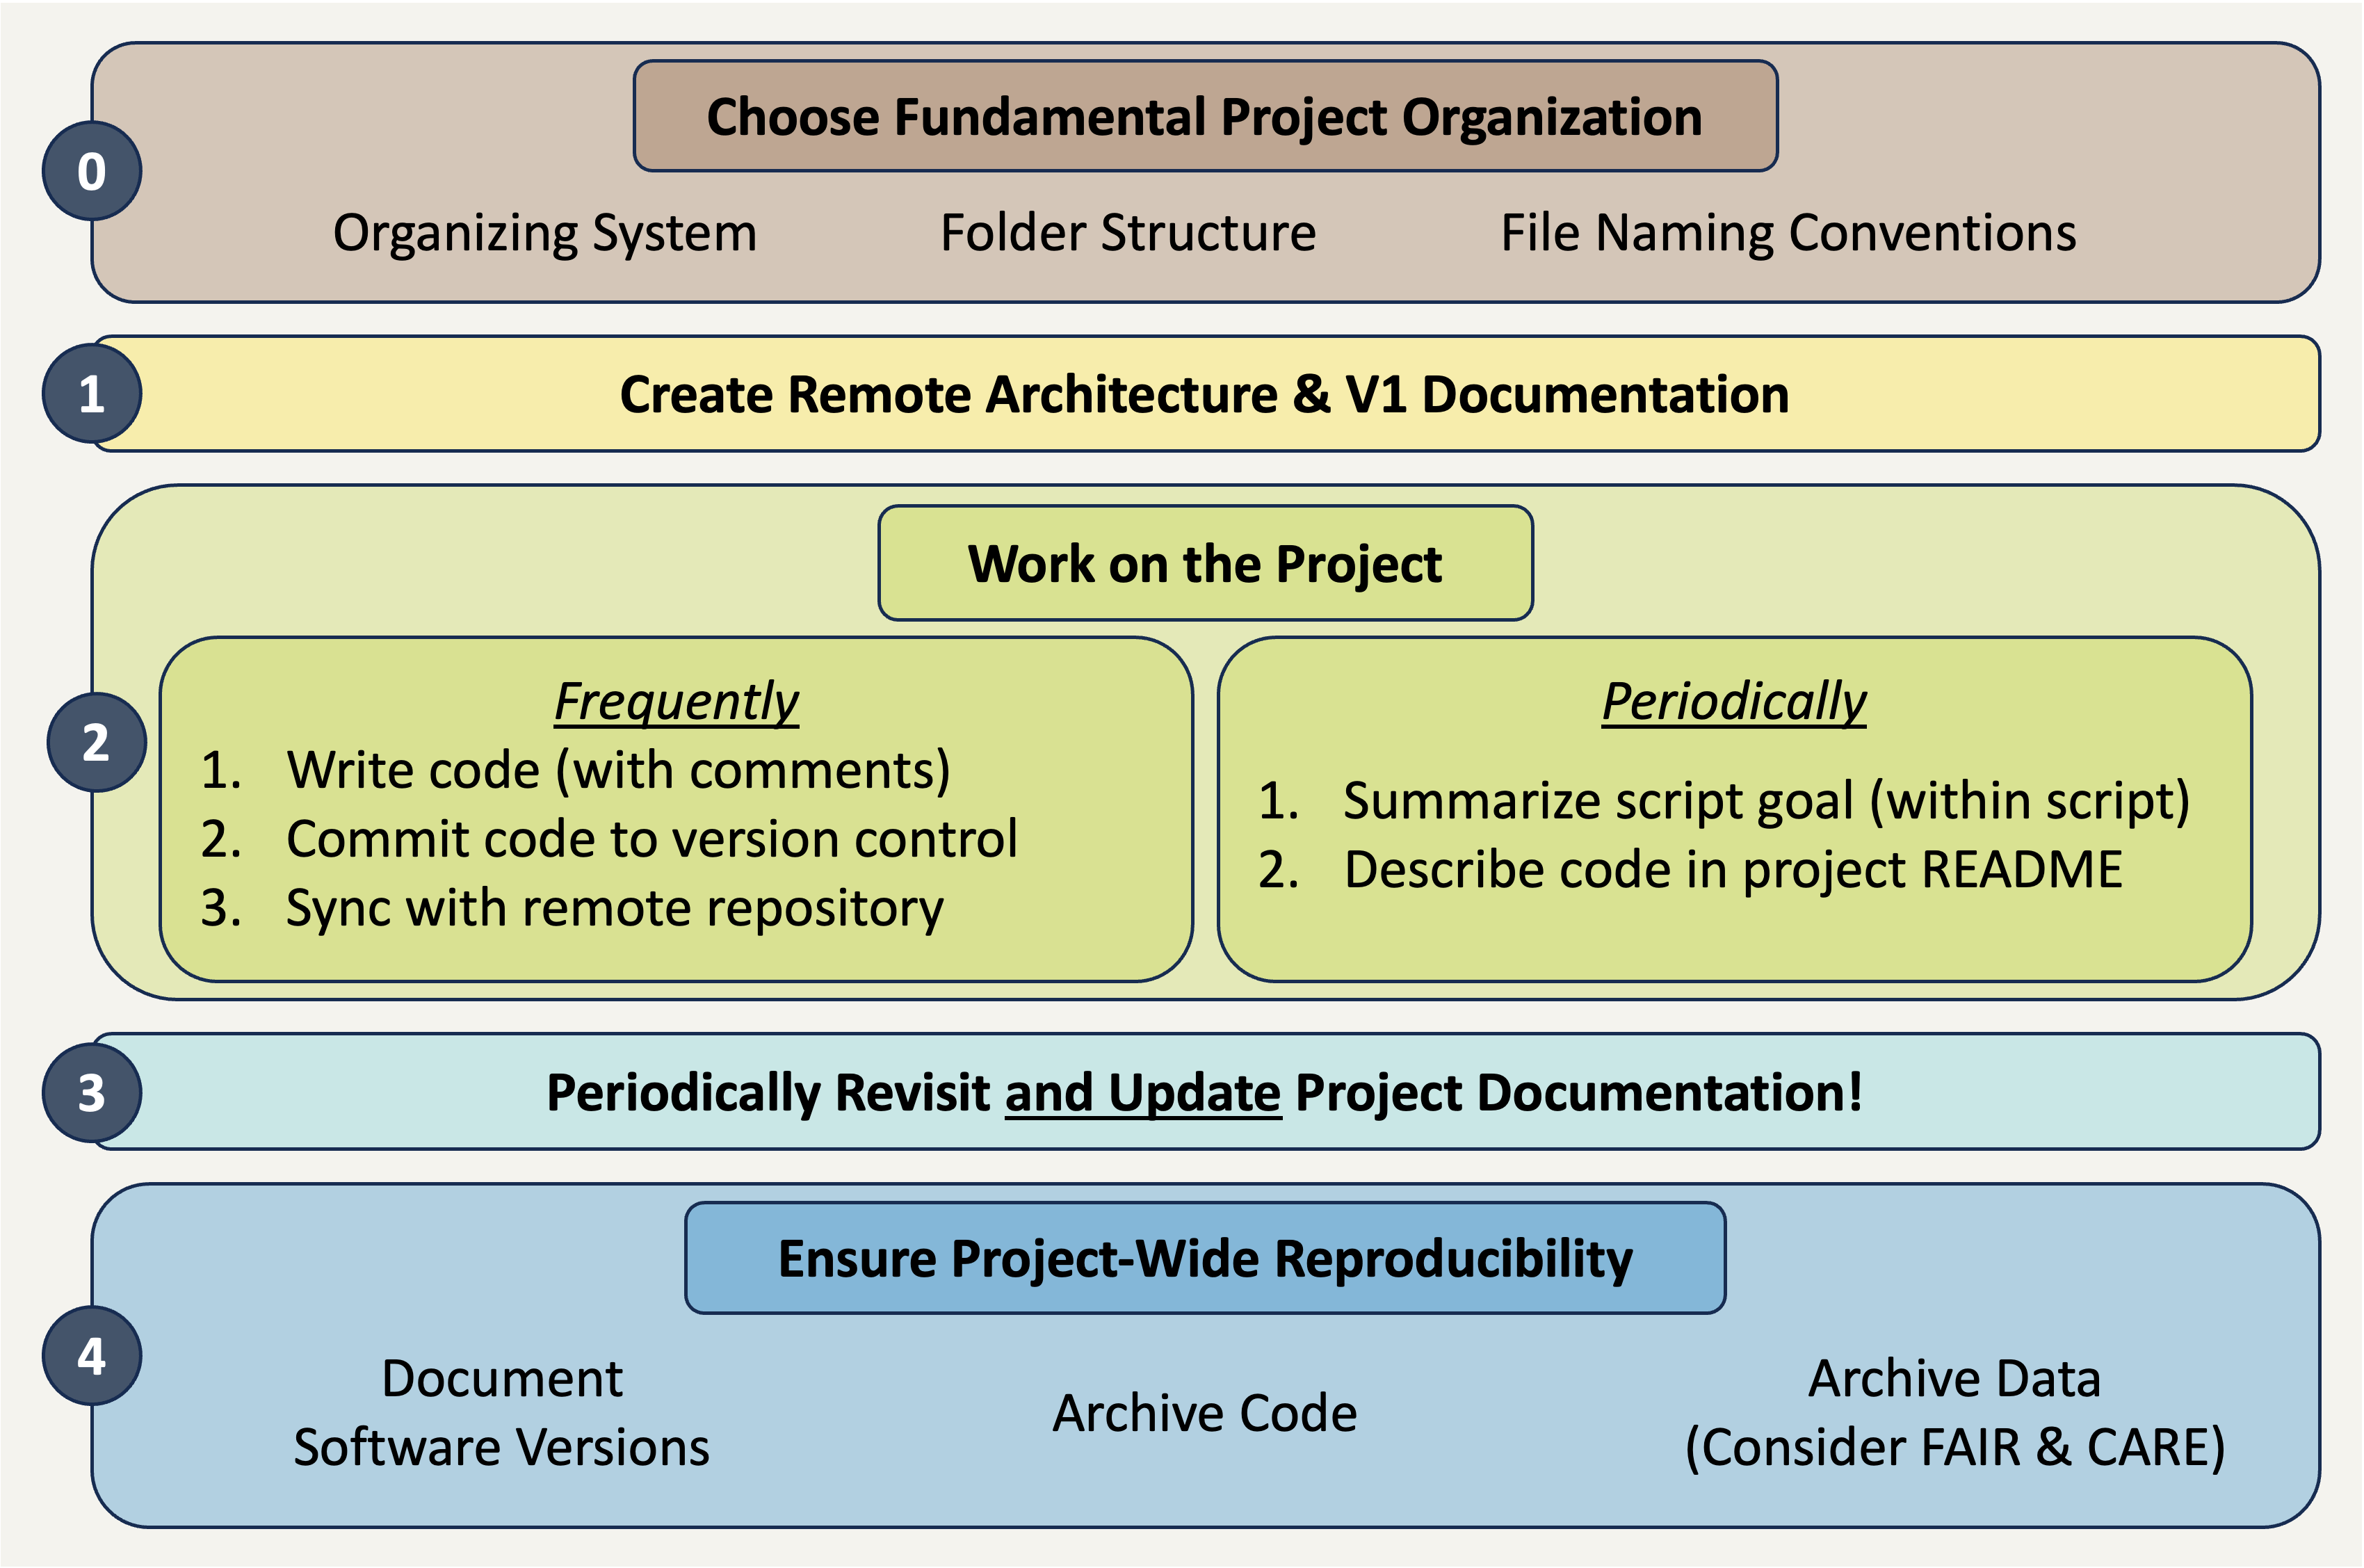 General steps for creating and maintaining a reproducible project. Steps follow the major headings of this section from starting on the 'right foot' with well thought out documentation, flowing through to consistent maintenance, and ending with some of the decisions needed for publication